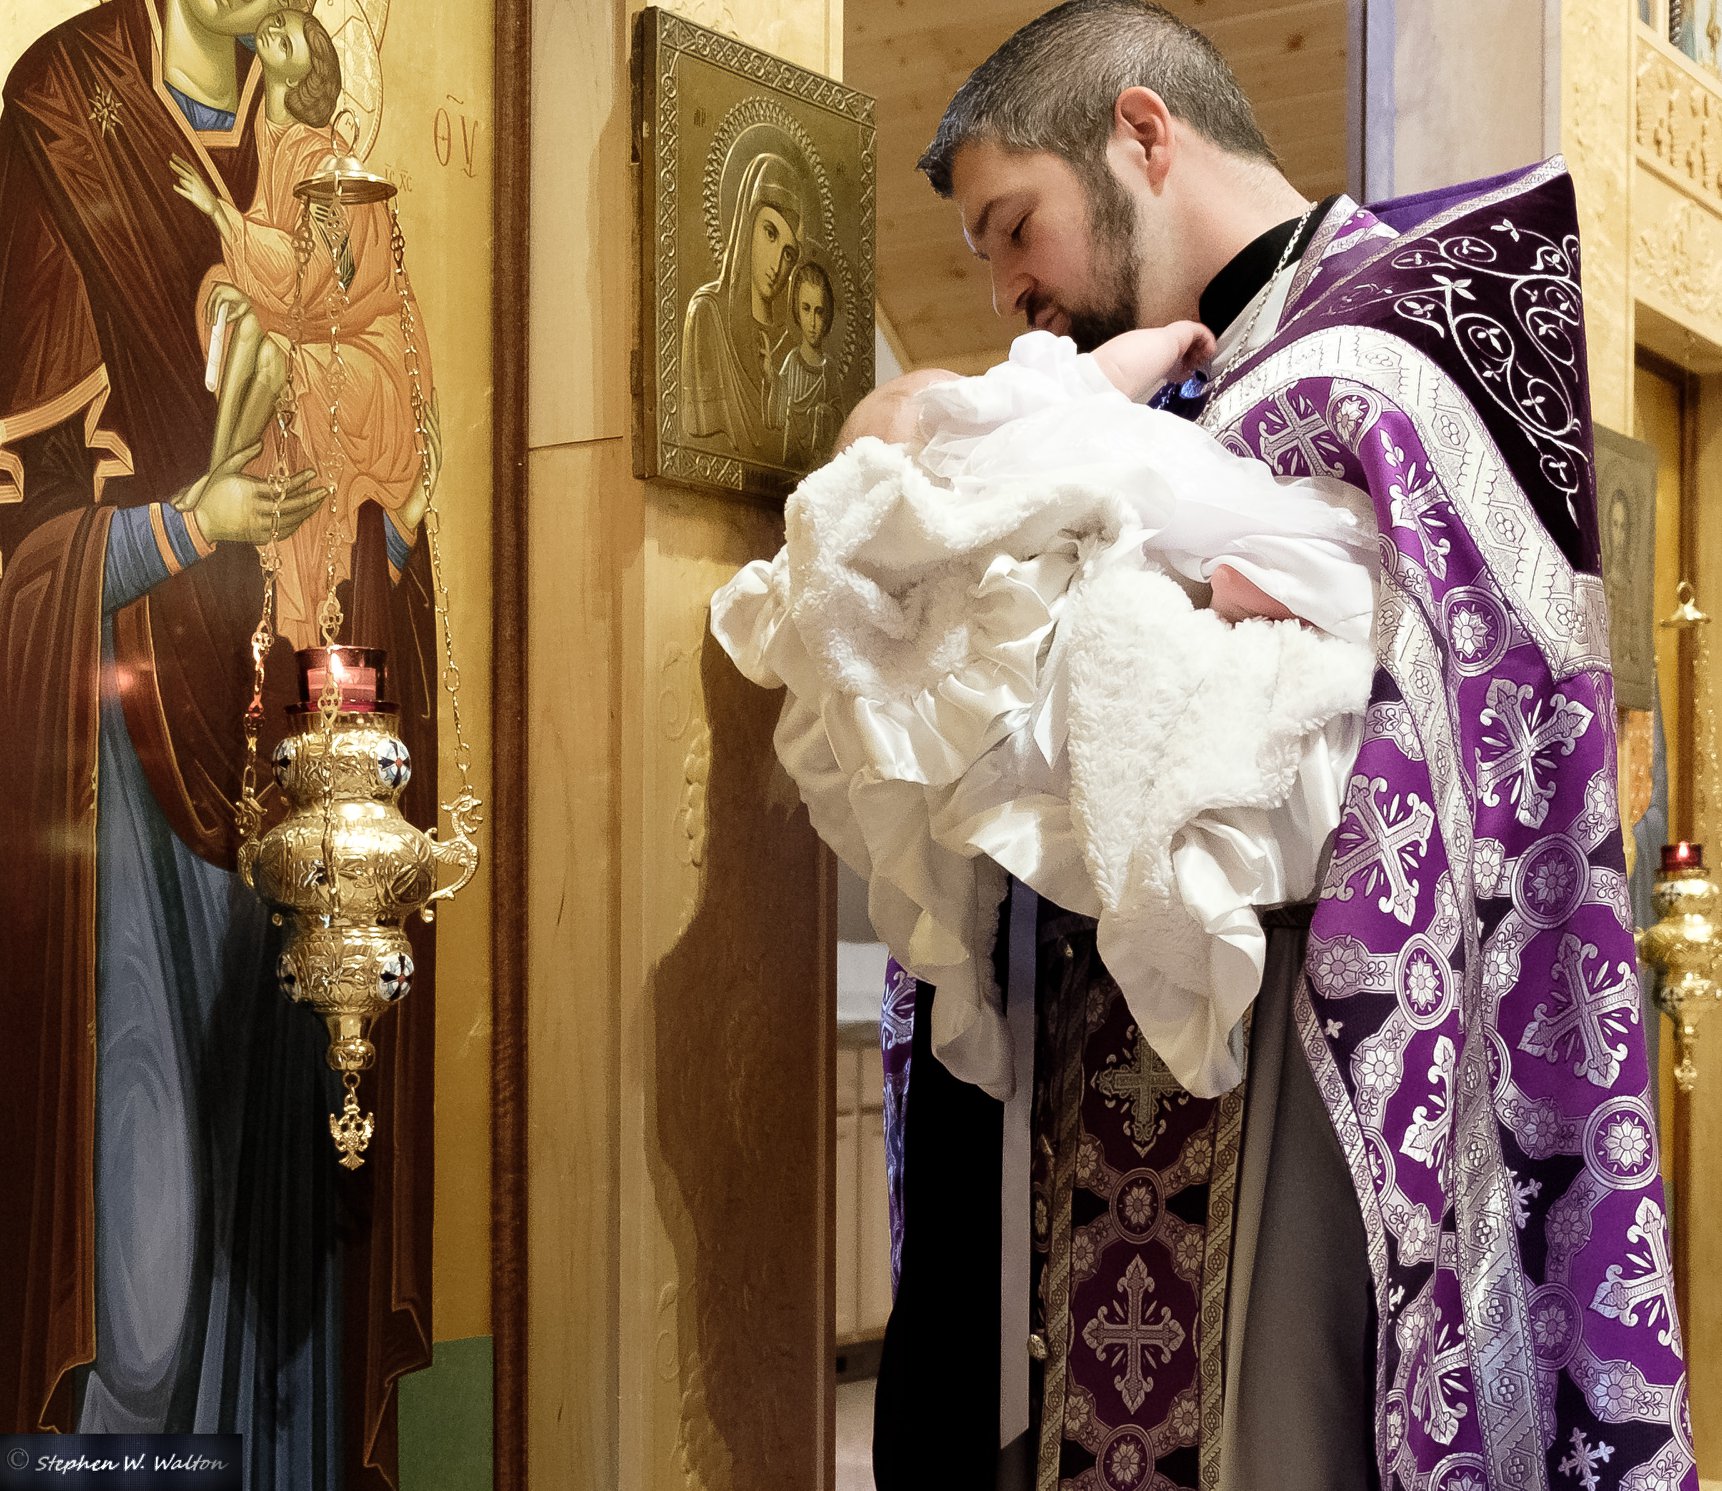  priest carrying infant up to icons 